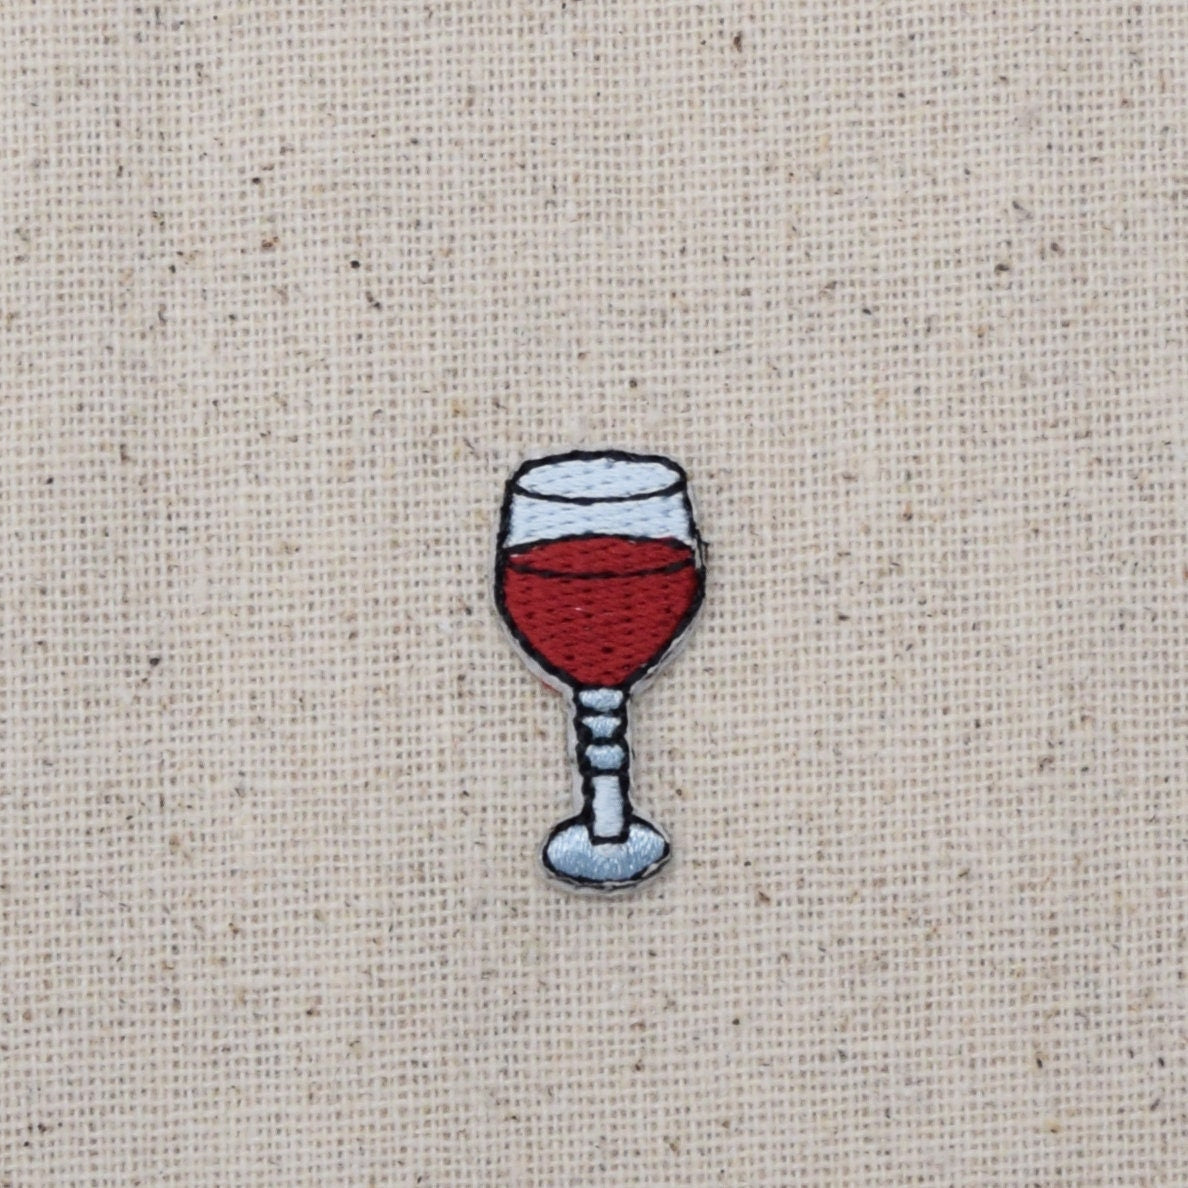 Mini/Small - Red Wine - Drink Glass - Iron on Applique/Embroidered Patch WA63